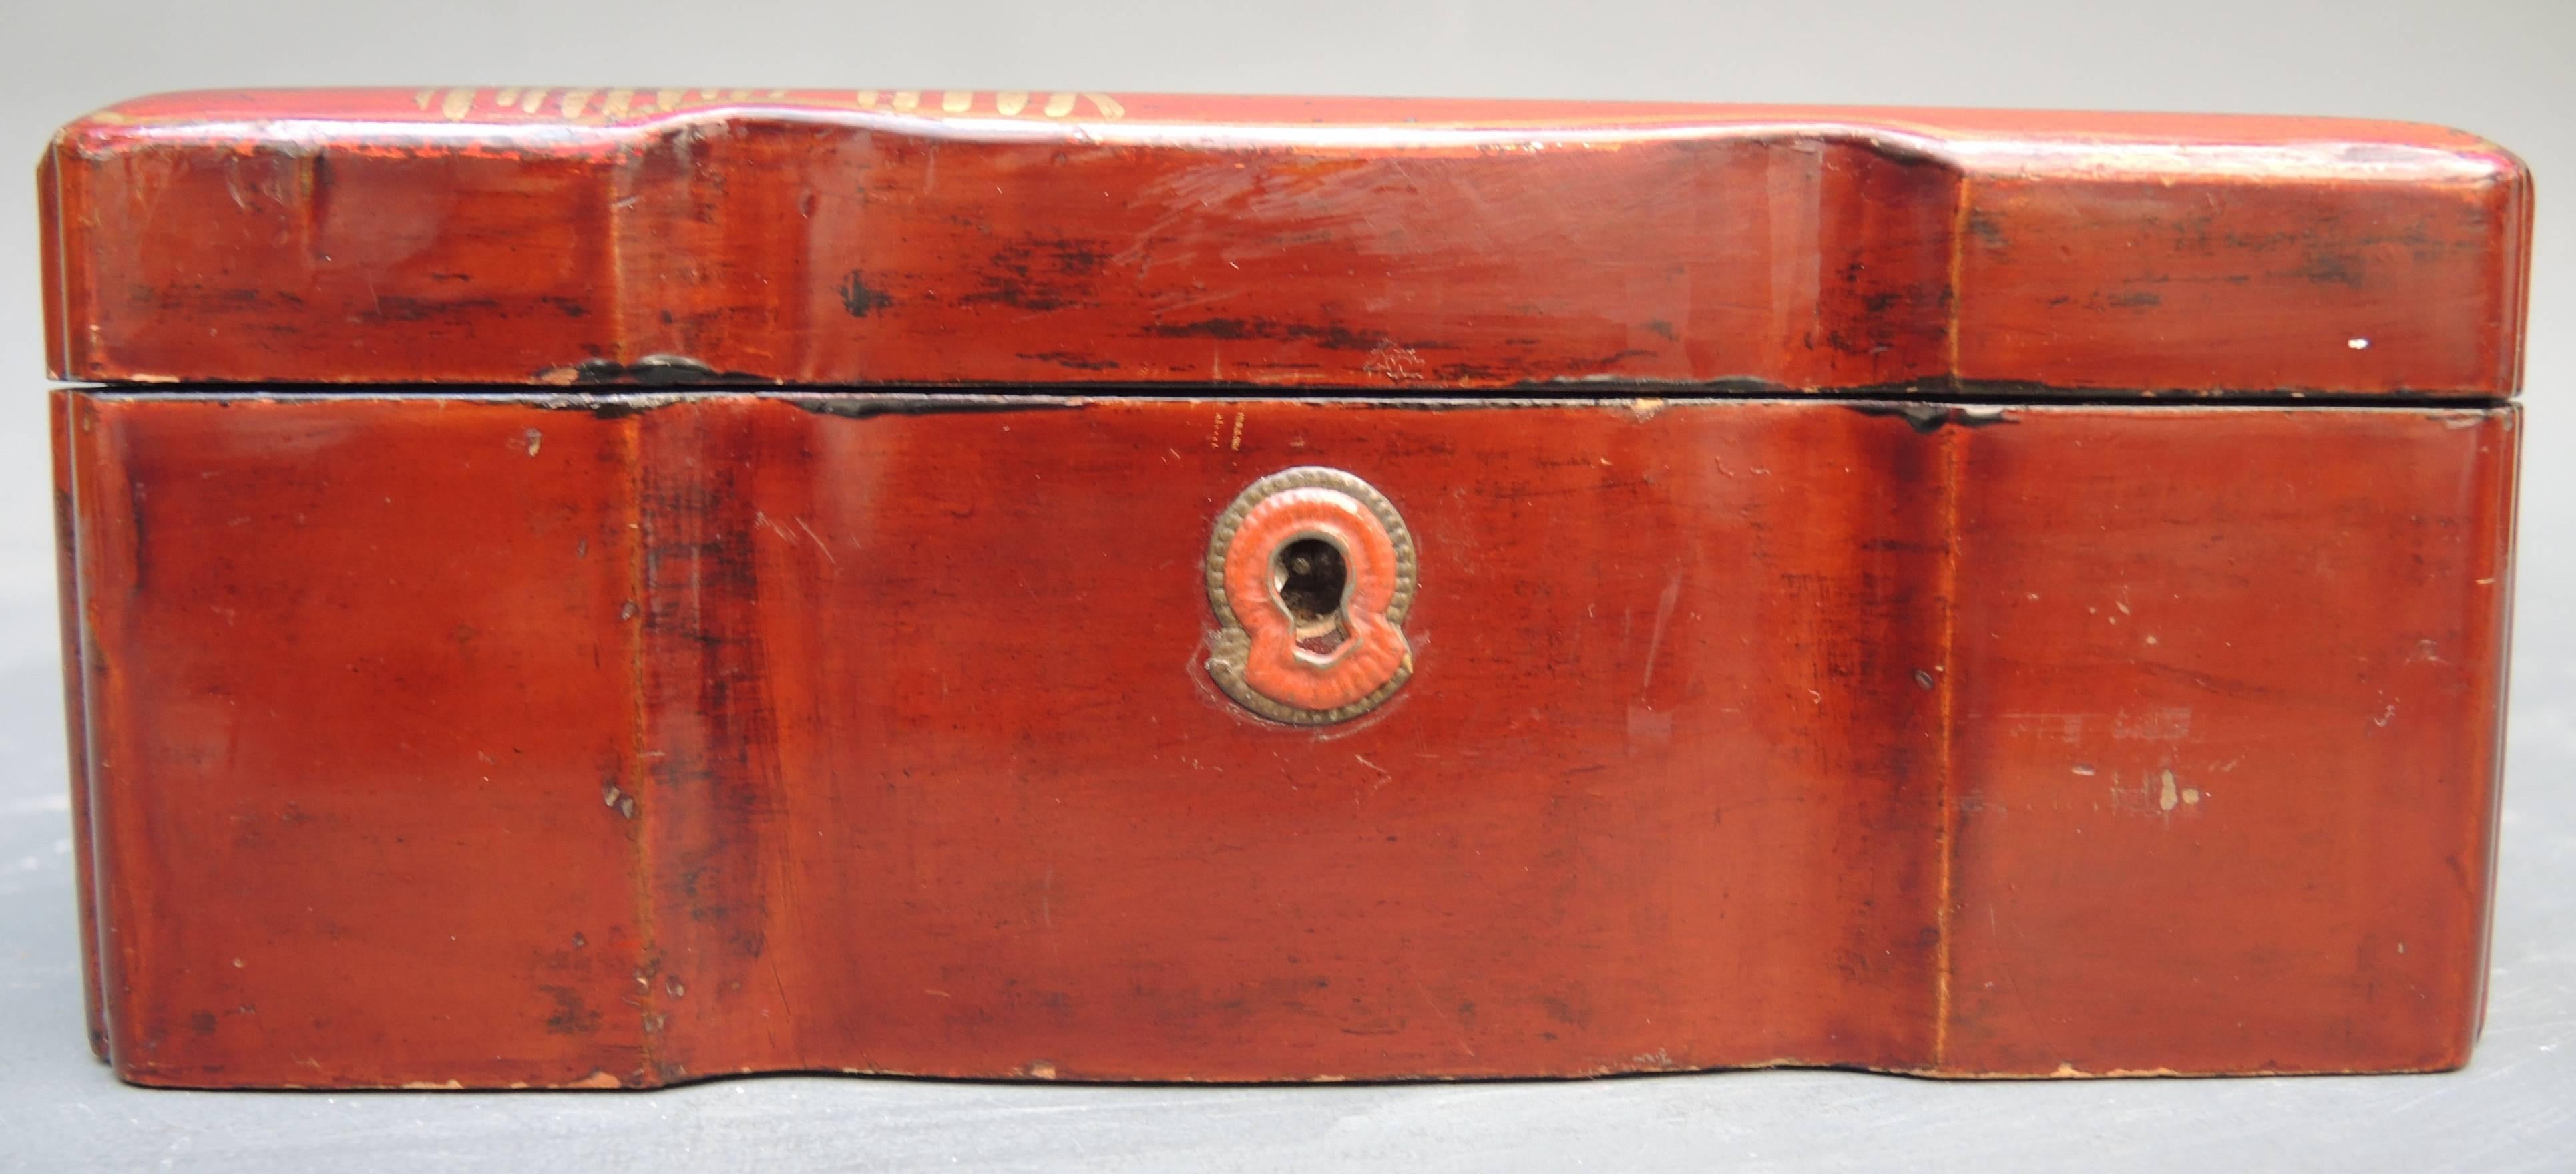 Art Deco Japanese Burnt Orange Lacquered Box with Gold Painted Cranes